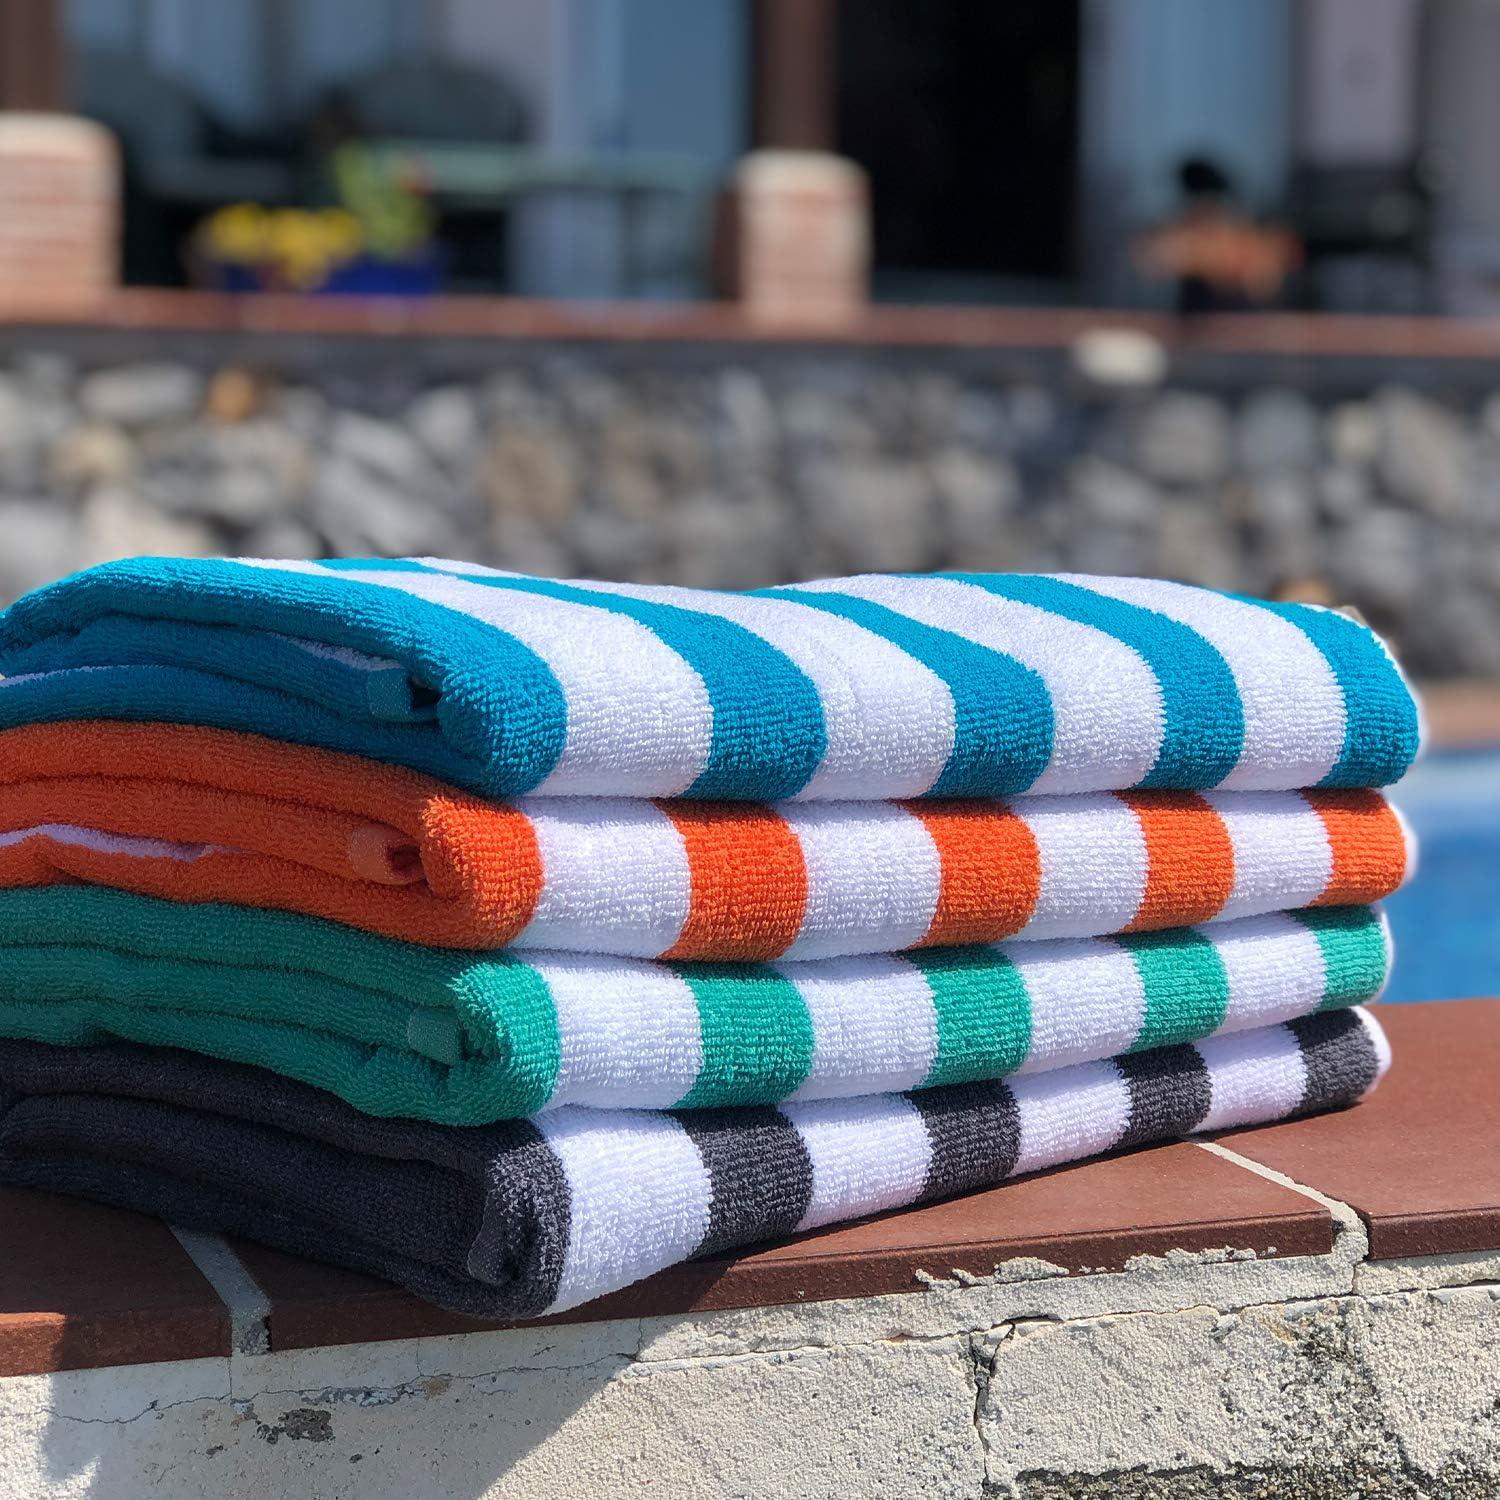 4 Pack of Cabana Beach Towels Extra Large 30x70 Soft Cotton Towel Set  Perfect Pool Towel or Beach Towel Striped Color Options 